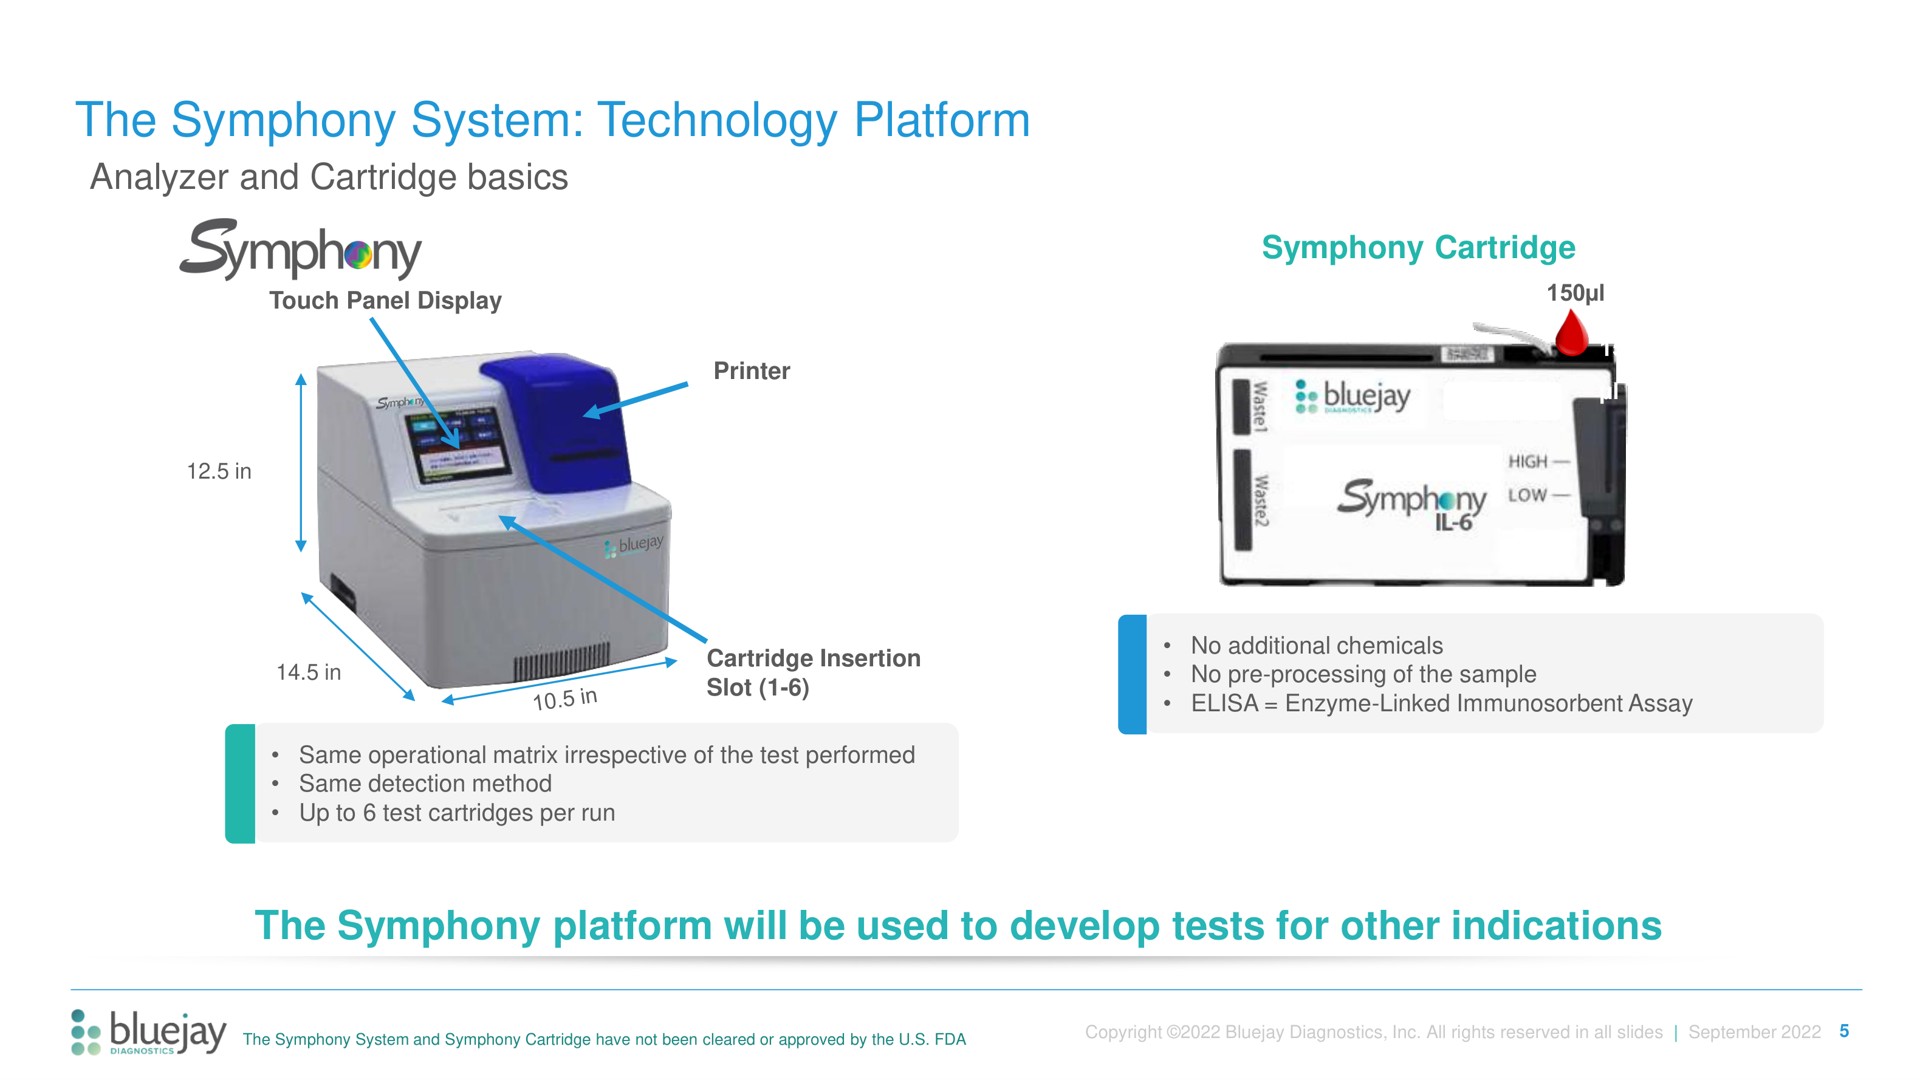 the symphony system technology platform the symphony platform will be used to develop tests for other indications analyzer and cartridge basics | Bluejay